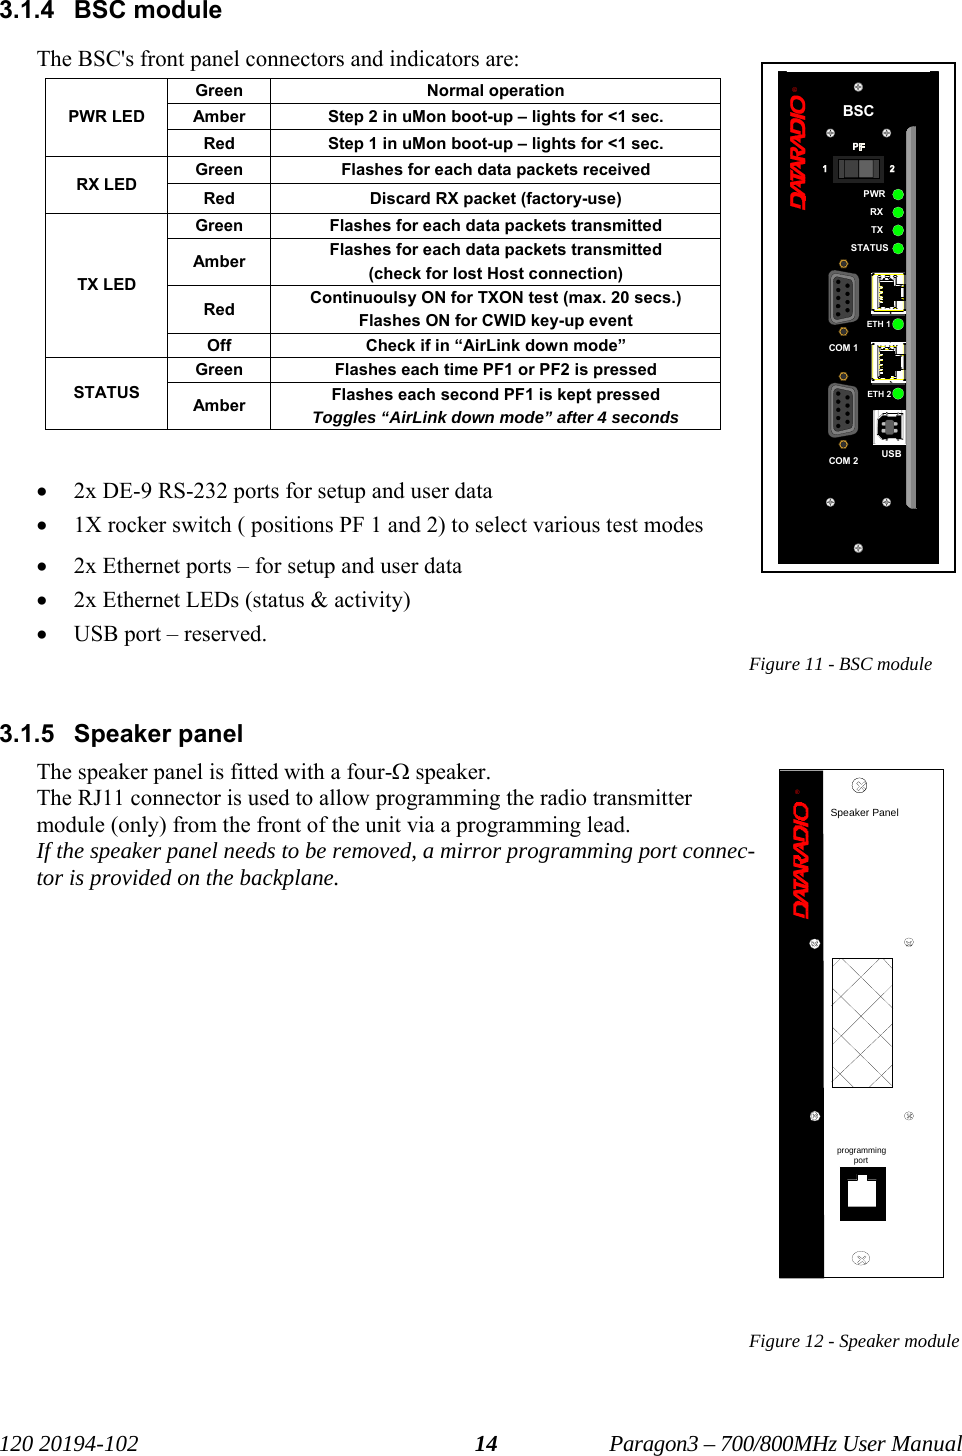   120 20194-102   Paragon3 – 700/800MHz User Manual 143.1.4 BSC module The BSC&apos;s front panel connectors and indicators are: Green   Normal operation Amber   Step 2 in uMon boot-up – lights for &lt;1 sec. PWR LED Red   Step 1 in uMon boot-up – lights for &lt;1 sec. Green   Flashes for each data packets received RX LED  Red         Discard RX packet (factory-use) Green   Flashes for each data packets transmitted Amber  Flashes for each data packets transmitted  (check for lost Host connection) Red  Continuoulsy ON for TXON test (max. 20 secs.) Flashes ON for CWID key-up event TX LED Off   Check if in “AirLink down mode” Green   Flashes each time PF1 or PF2 is pressed STATUS  Amber  Flashes each second PF1 is kept pressed  Toggles “AirLink down mode” after 4 seconds  • 2x DE-9 RS-232 ports for setup and user data • 1X rocker switch ( positions PF 1 and 2) to select various test modes • 2x Ethernet ports – for setup and user data • 2x Ethernet LEDs (status &amp; activity)  • USB port – reserved.  Figure 11 - BSC module  3.1.5 Speaker panel The speaker panel is fitted with a four-Ω speaker.  The RJ11 connector is used to allow programming the radio transmitter module (only) from the front of the unit via a programming lead.  If the speaker panel needs to be removed, a mirror programming port connec-tor is provided on the backplane.                Figure 12 - Speaker module  ®PWRTXBSCETH 2RXUSBETH 1COM 2COM 1STATUS® Speaker Panelprogrammingport 